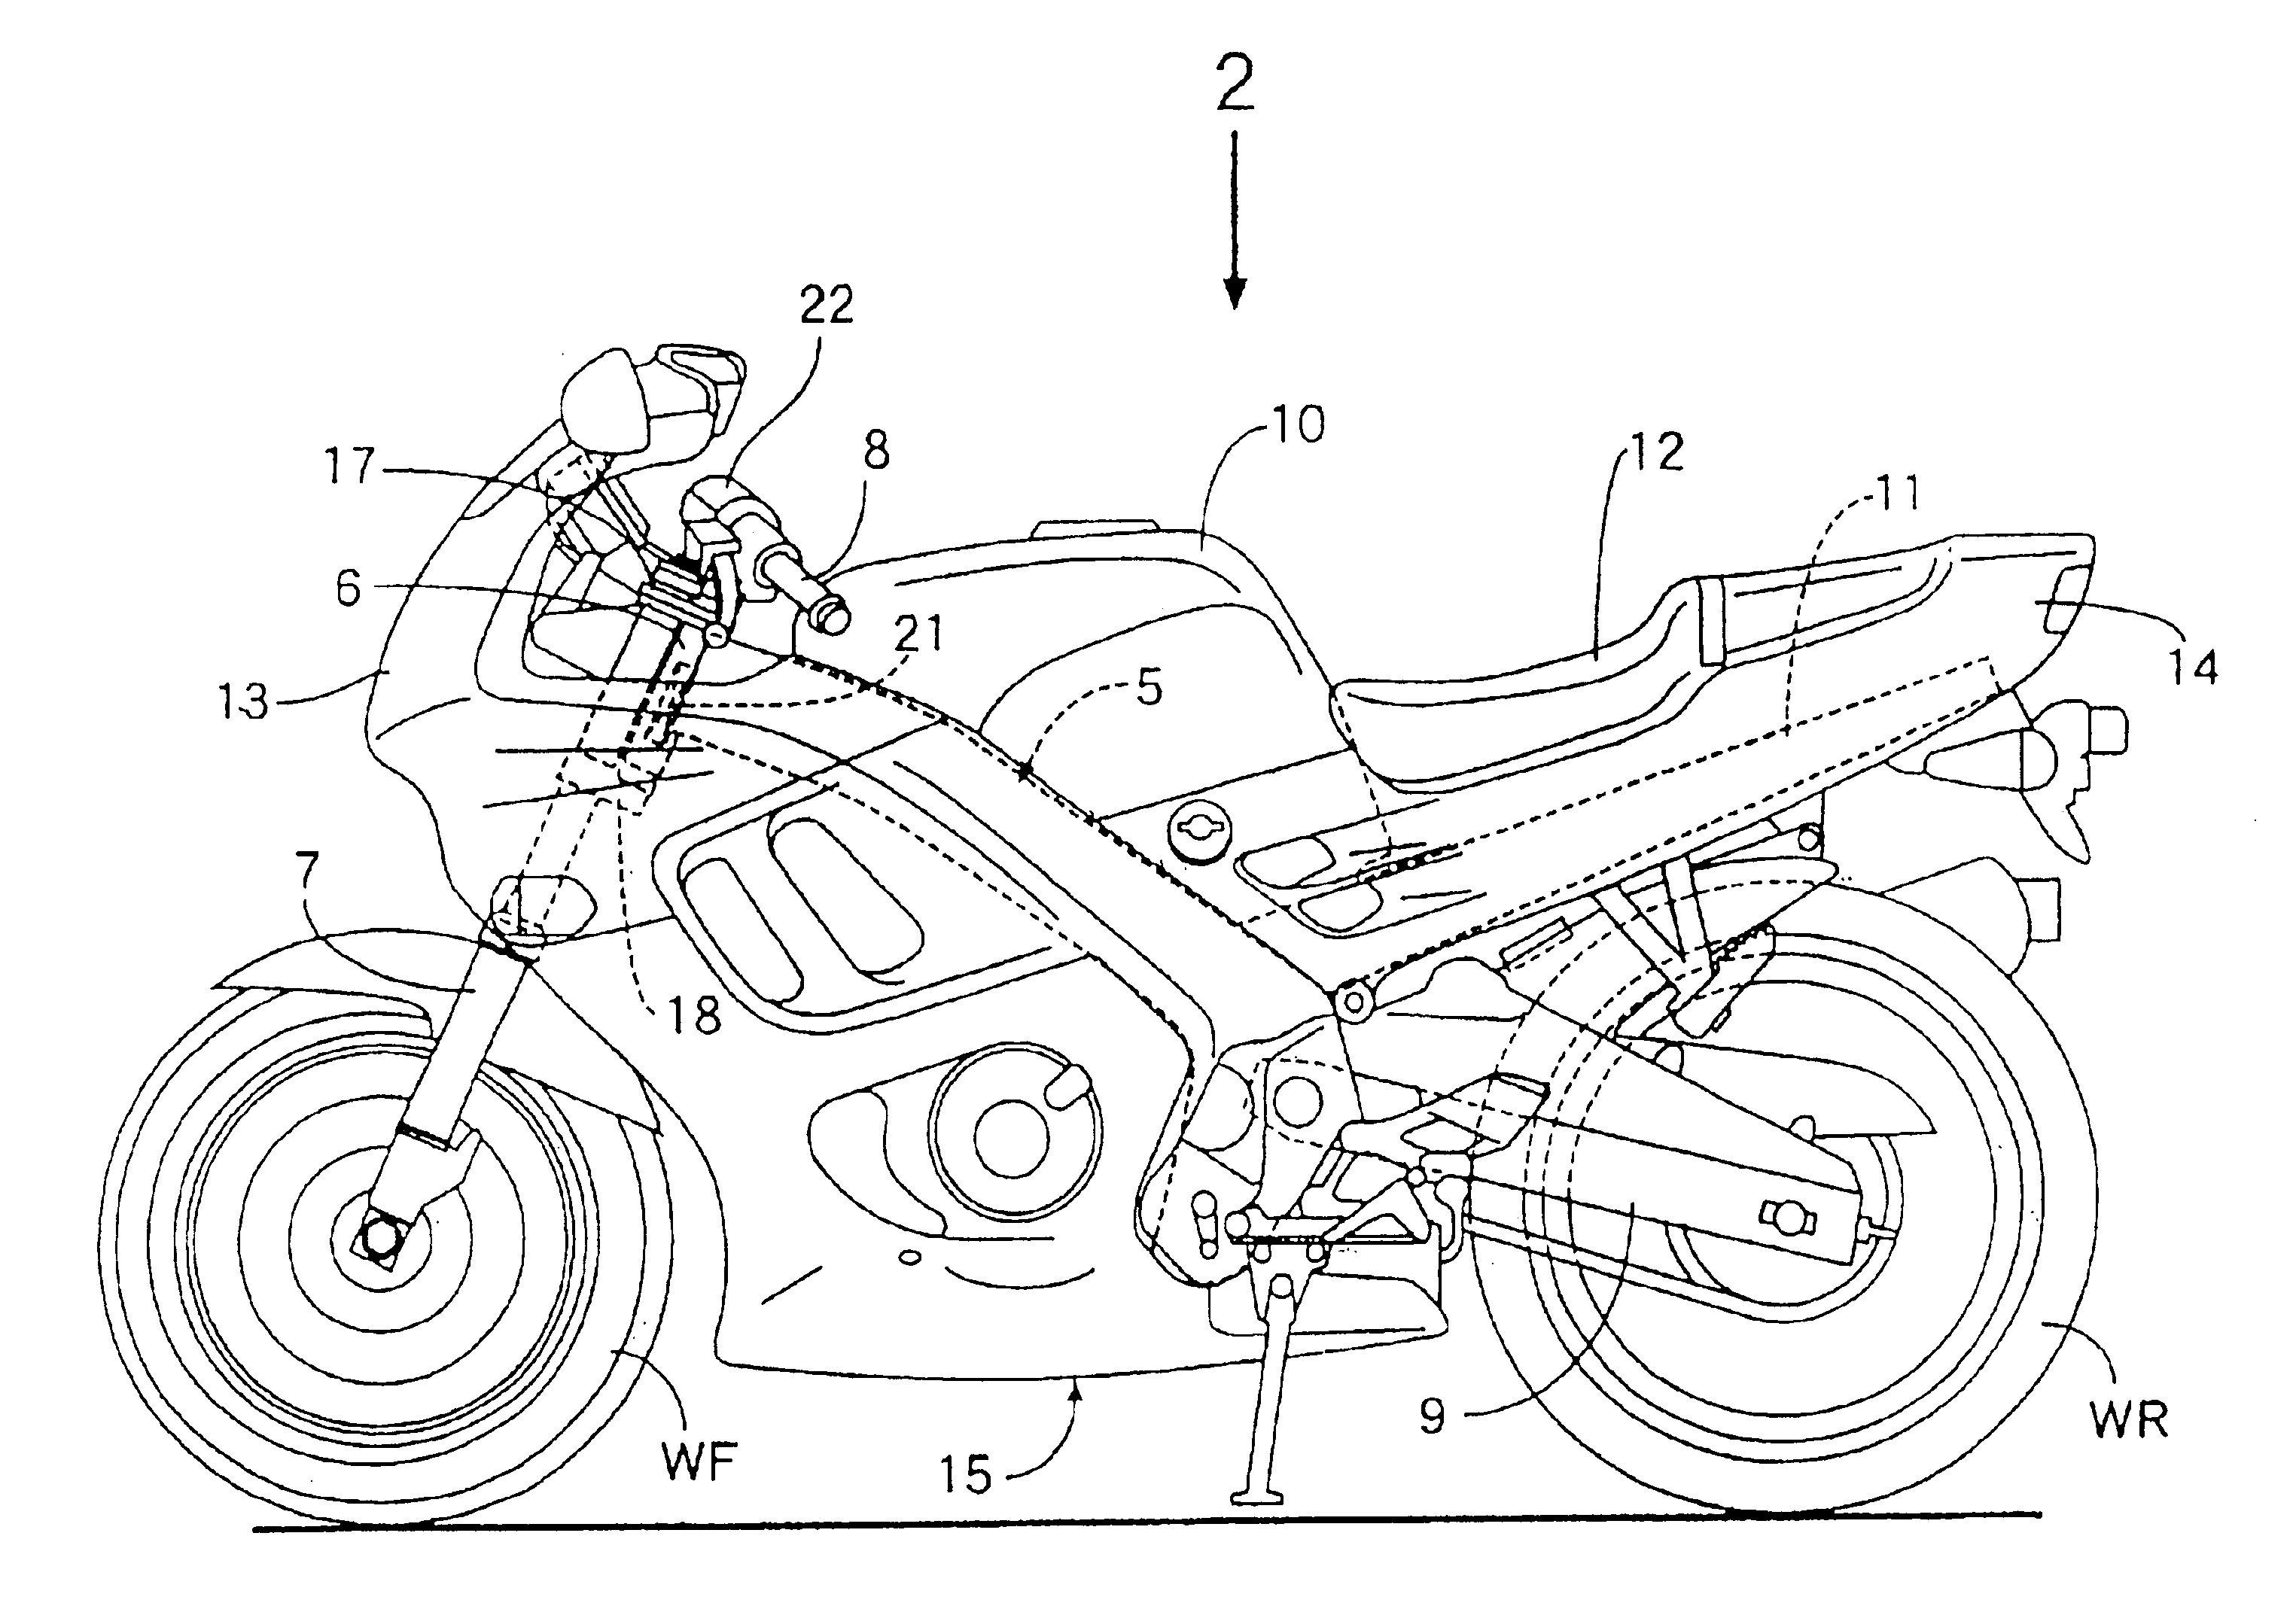 Airbag apparatus for a compact vehicle